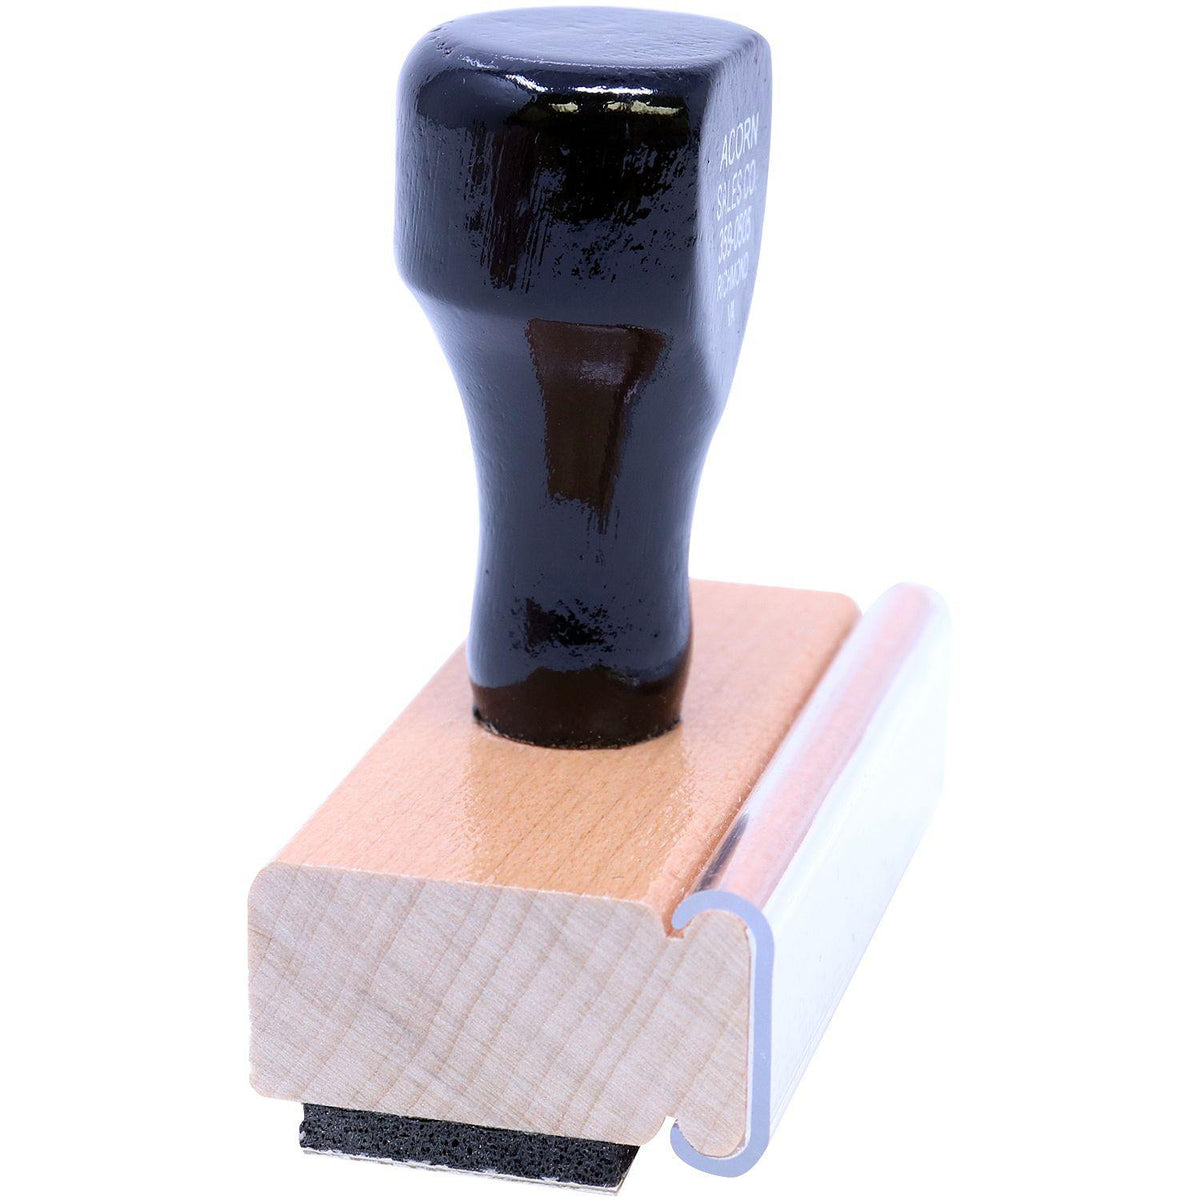 Side View of Bold Fragile Rubber Stamp at an Angle